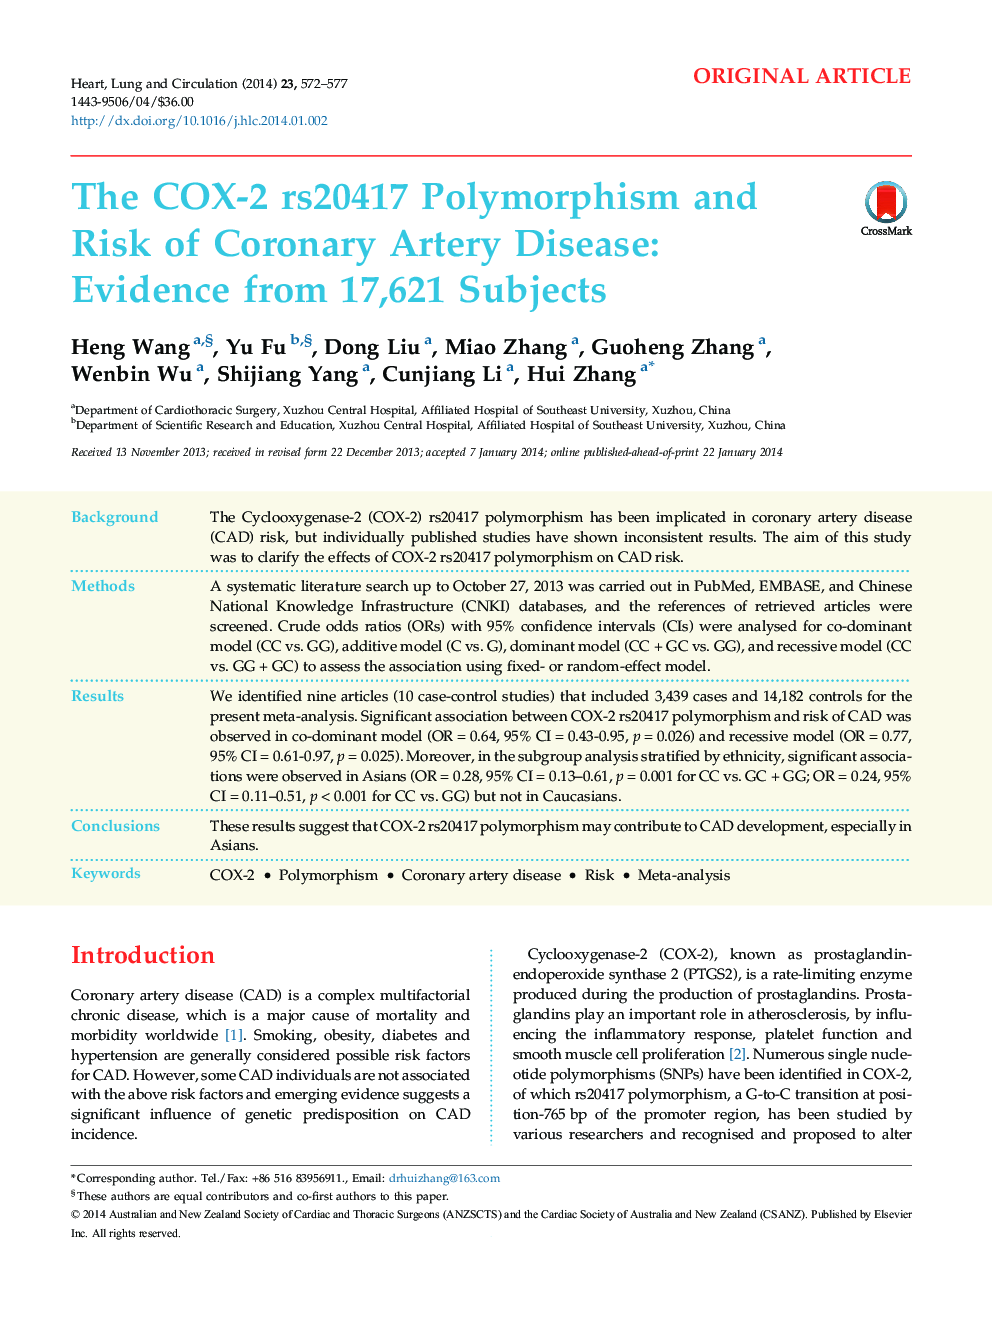 The COX-2 rs20417 Polymorphism and Risk of Coronary Artery Disease: Evidence from 17,621 Subjects